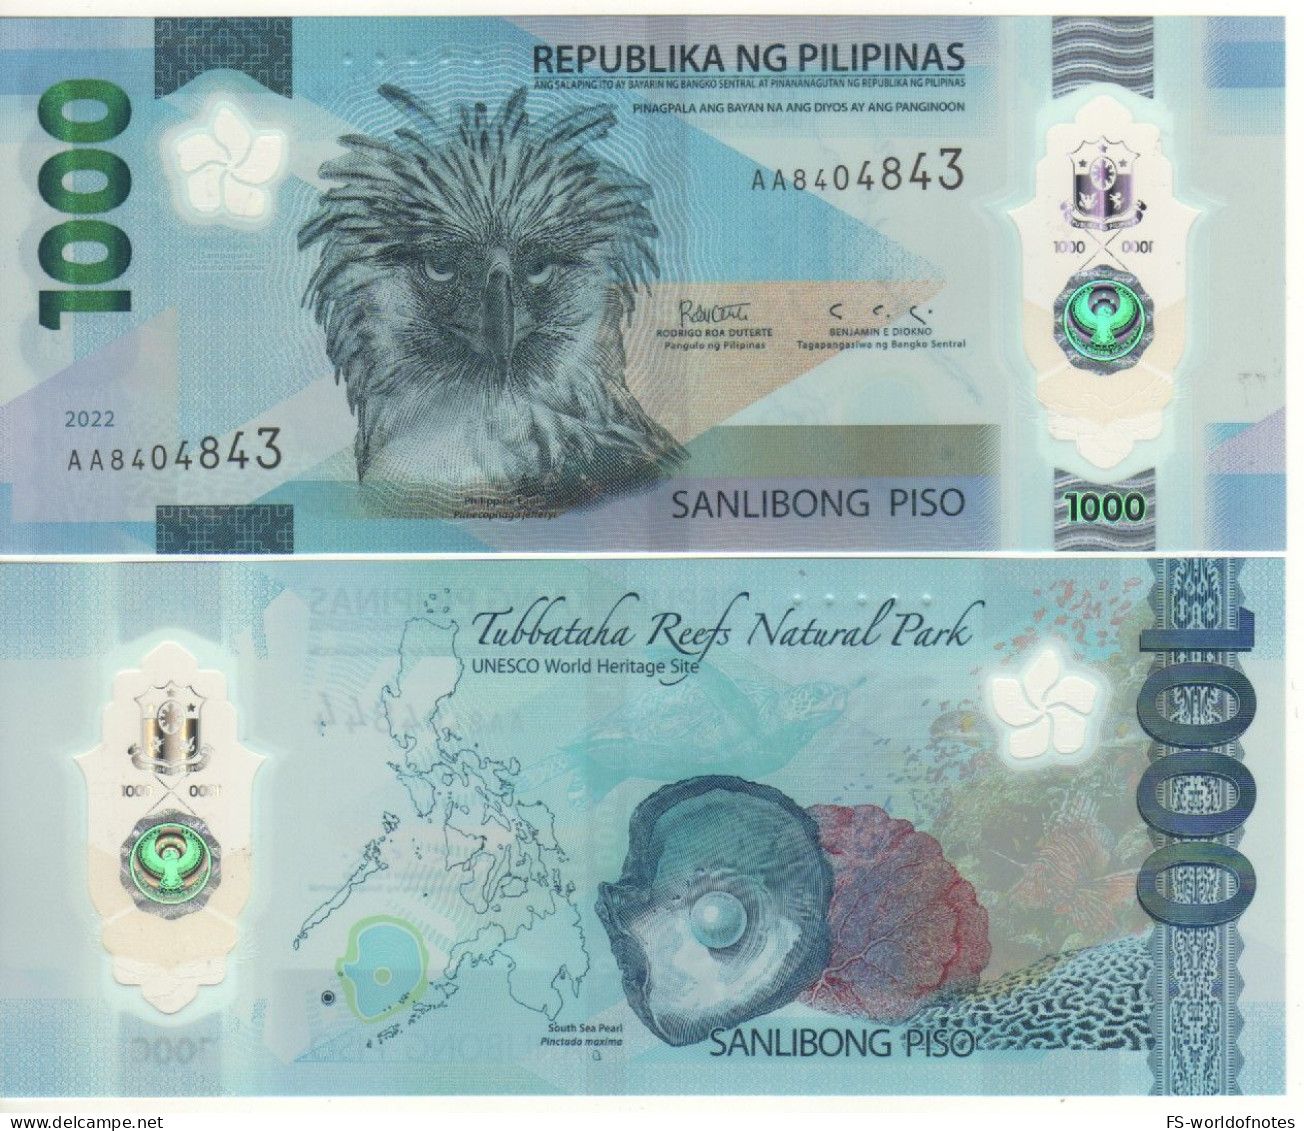 PHILIPPINES  1'000 Piso   Dated 2022 Serial AA    PW241a  POLIMER   "Philippine Eagle+ Pearl Oyster At Back" - Philippines